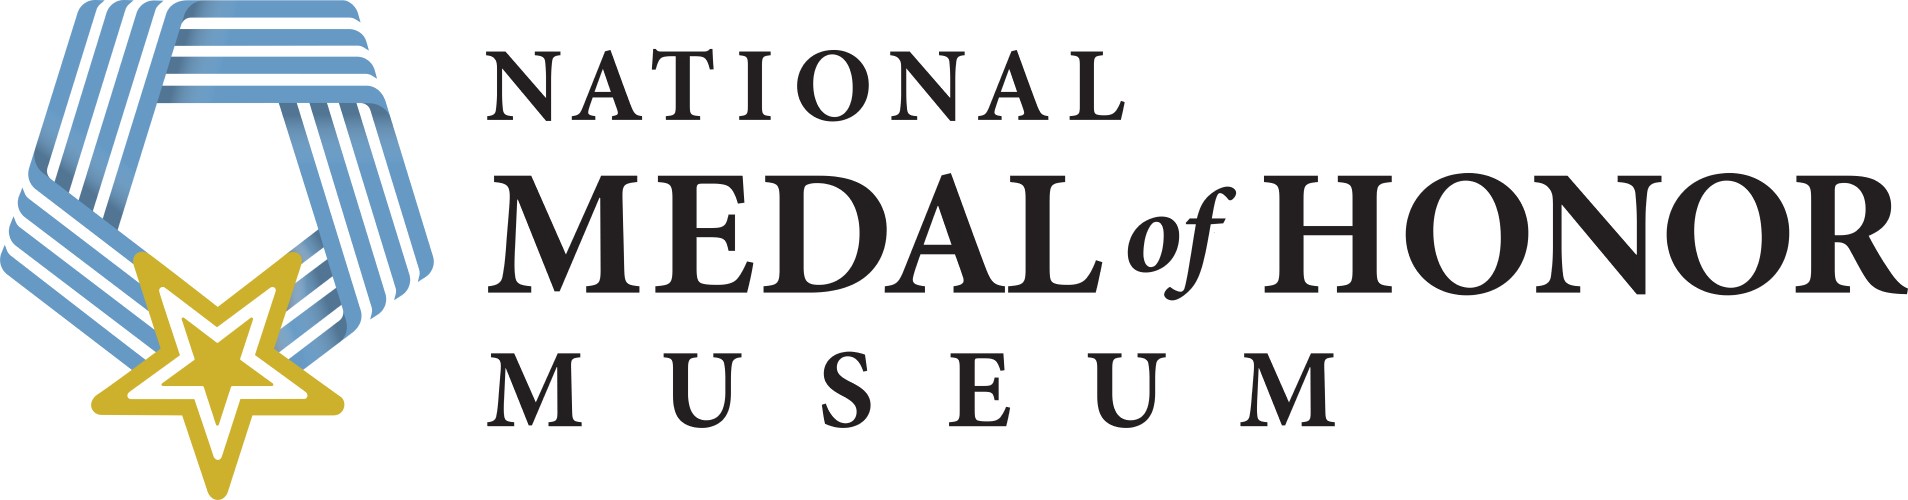 National medal of honor museum